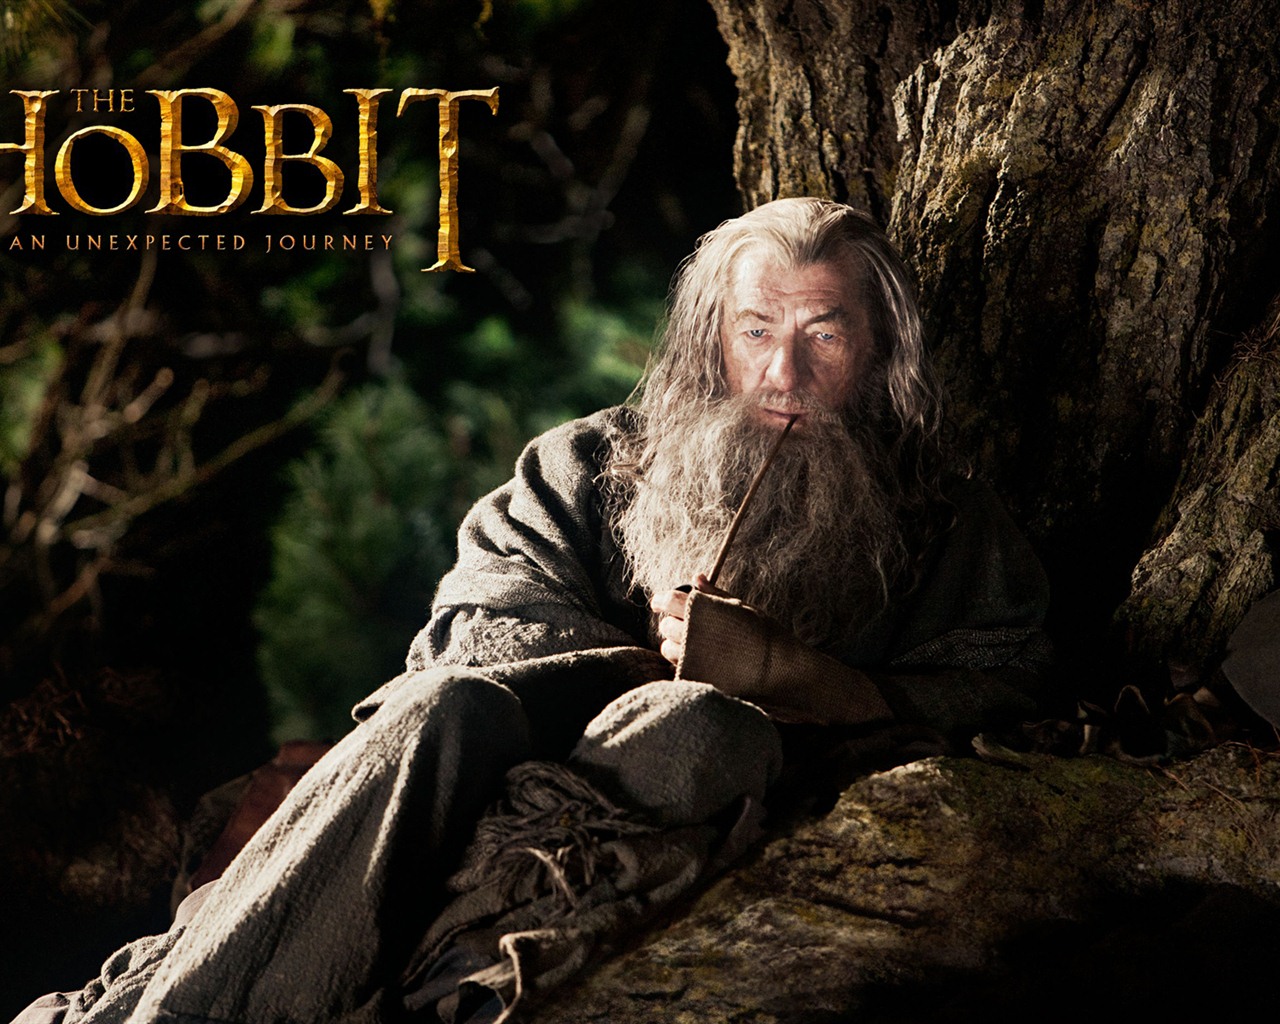 The Hobbit: An Unexpected Journey HD wallpapers #10 - 1280x1024